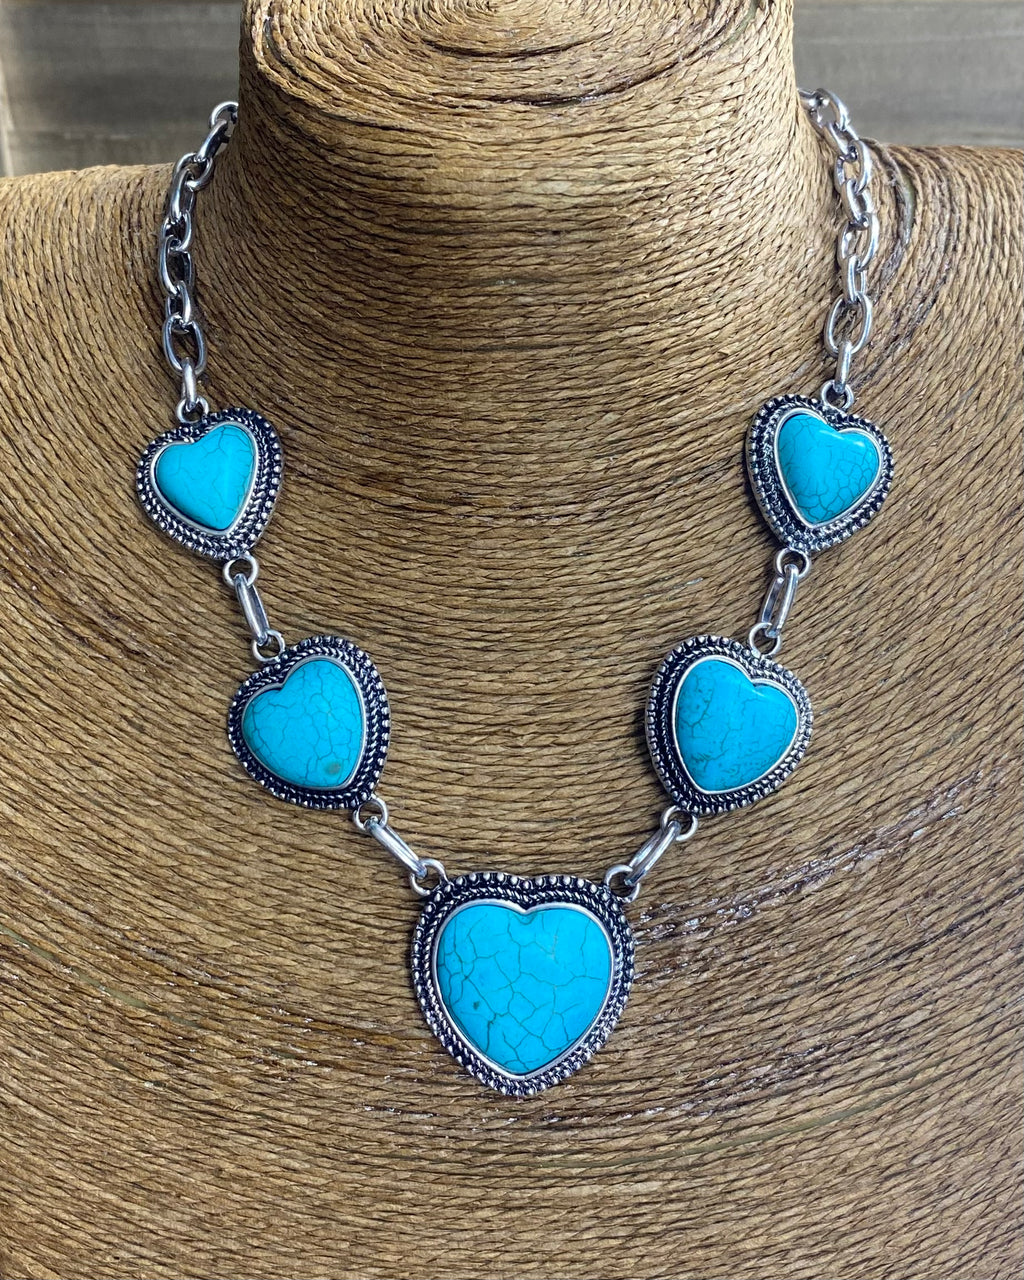 Turquoise Heart Chain Necklace